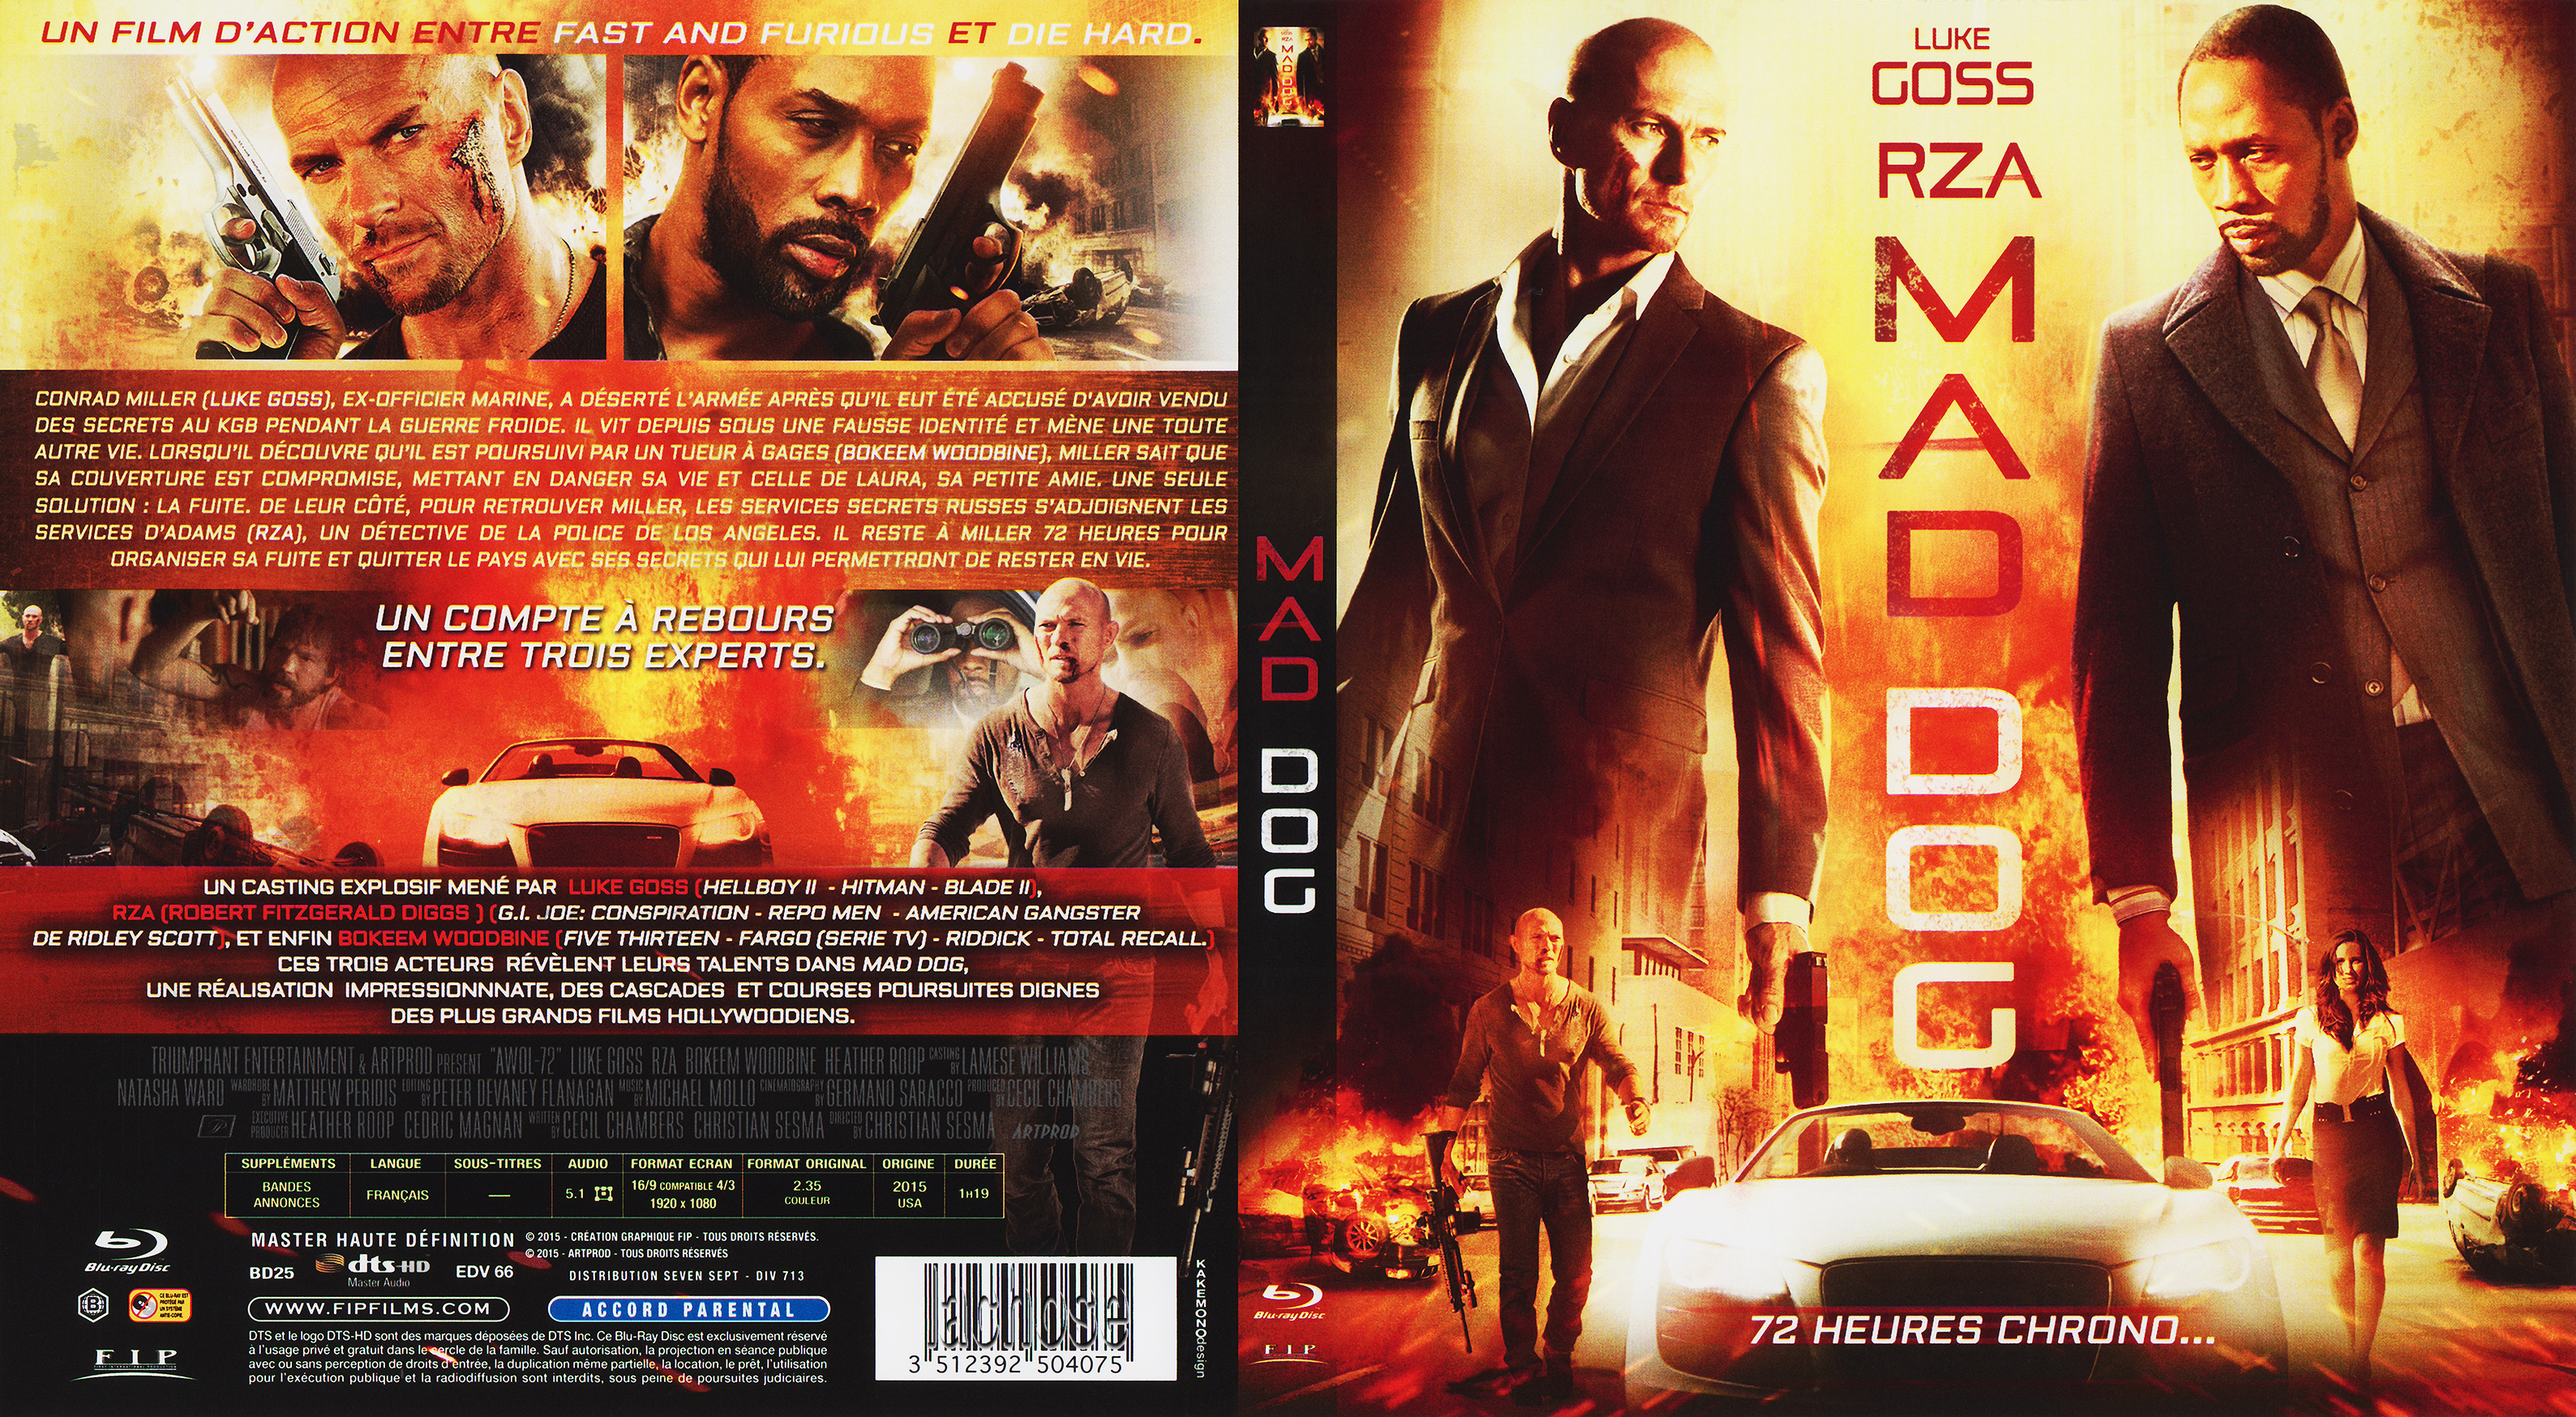 Jaquette DVD Mad dog (BLU-RAY)